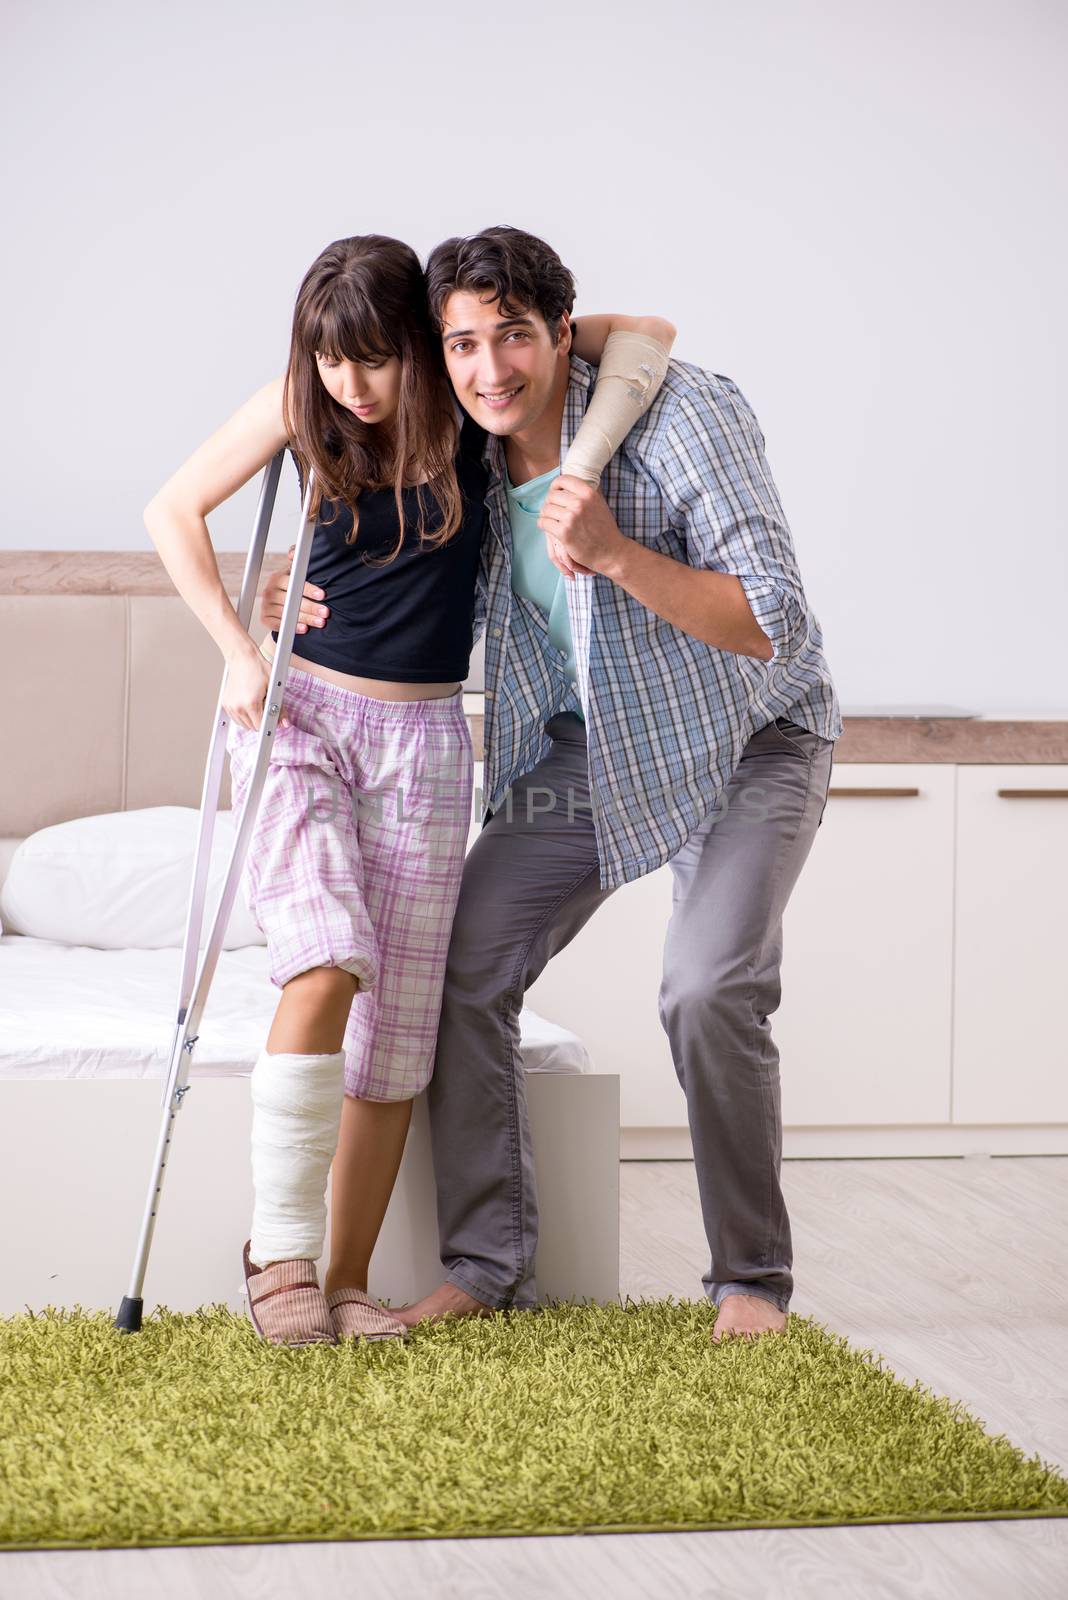 Caring husband looking after his injured wife by Elnur